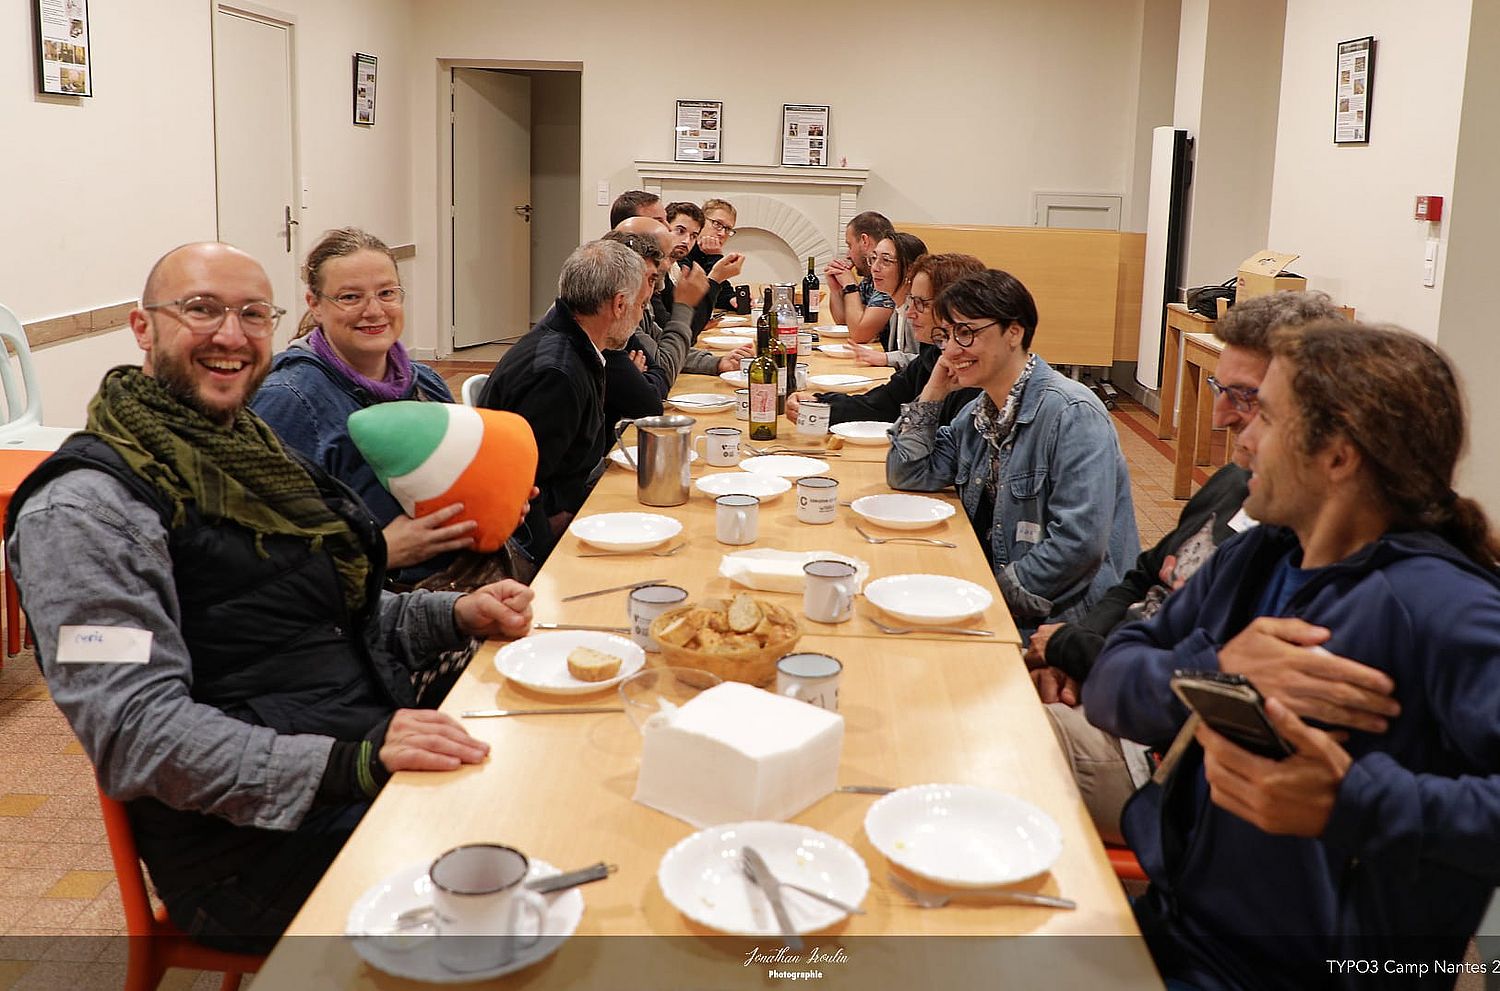 People at mealtime, smiling. A long table with empty white plates.